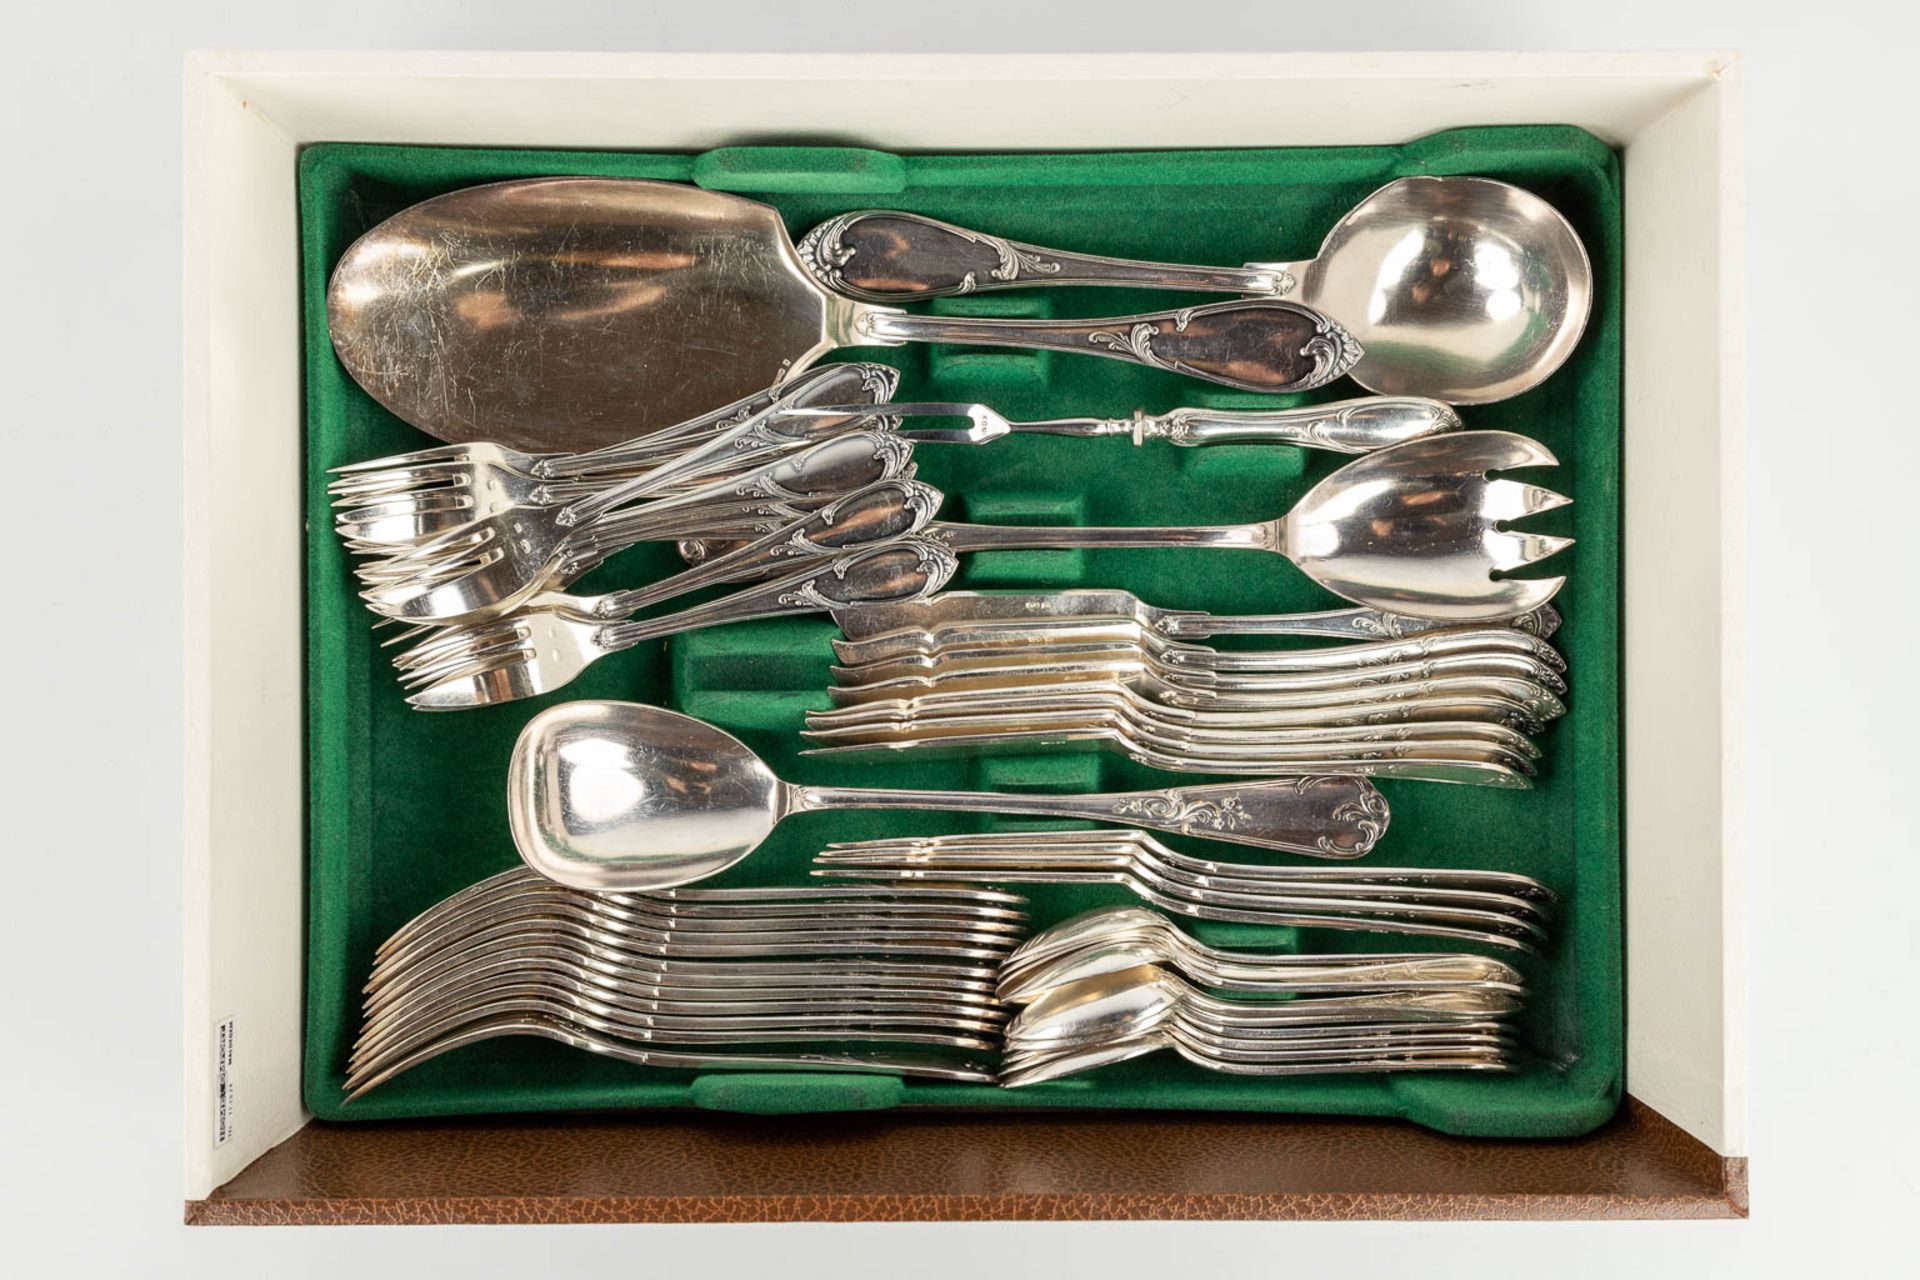 B. Wiskemann, Bruxelles, a silver-plated cutlery set, Louis XV style. (L: 30 x W: 39 x H: 22 cm) - Image 21 of 24